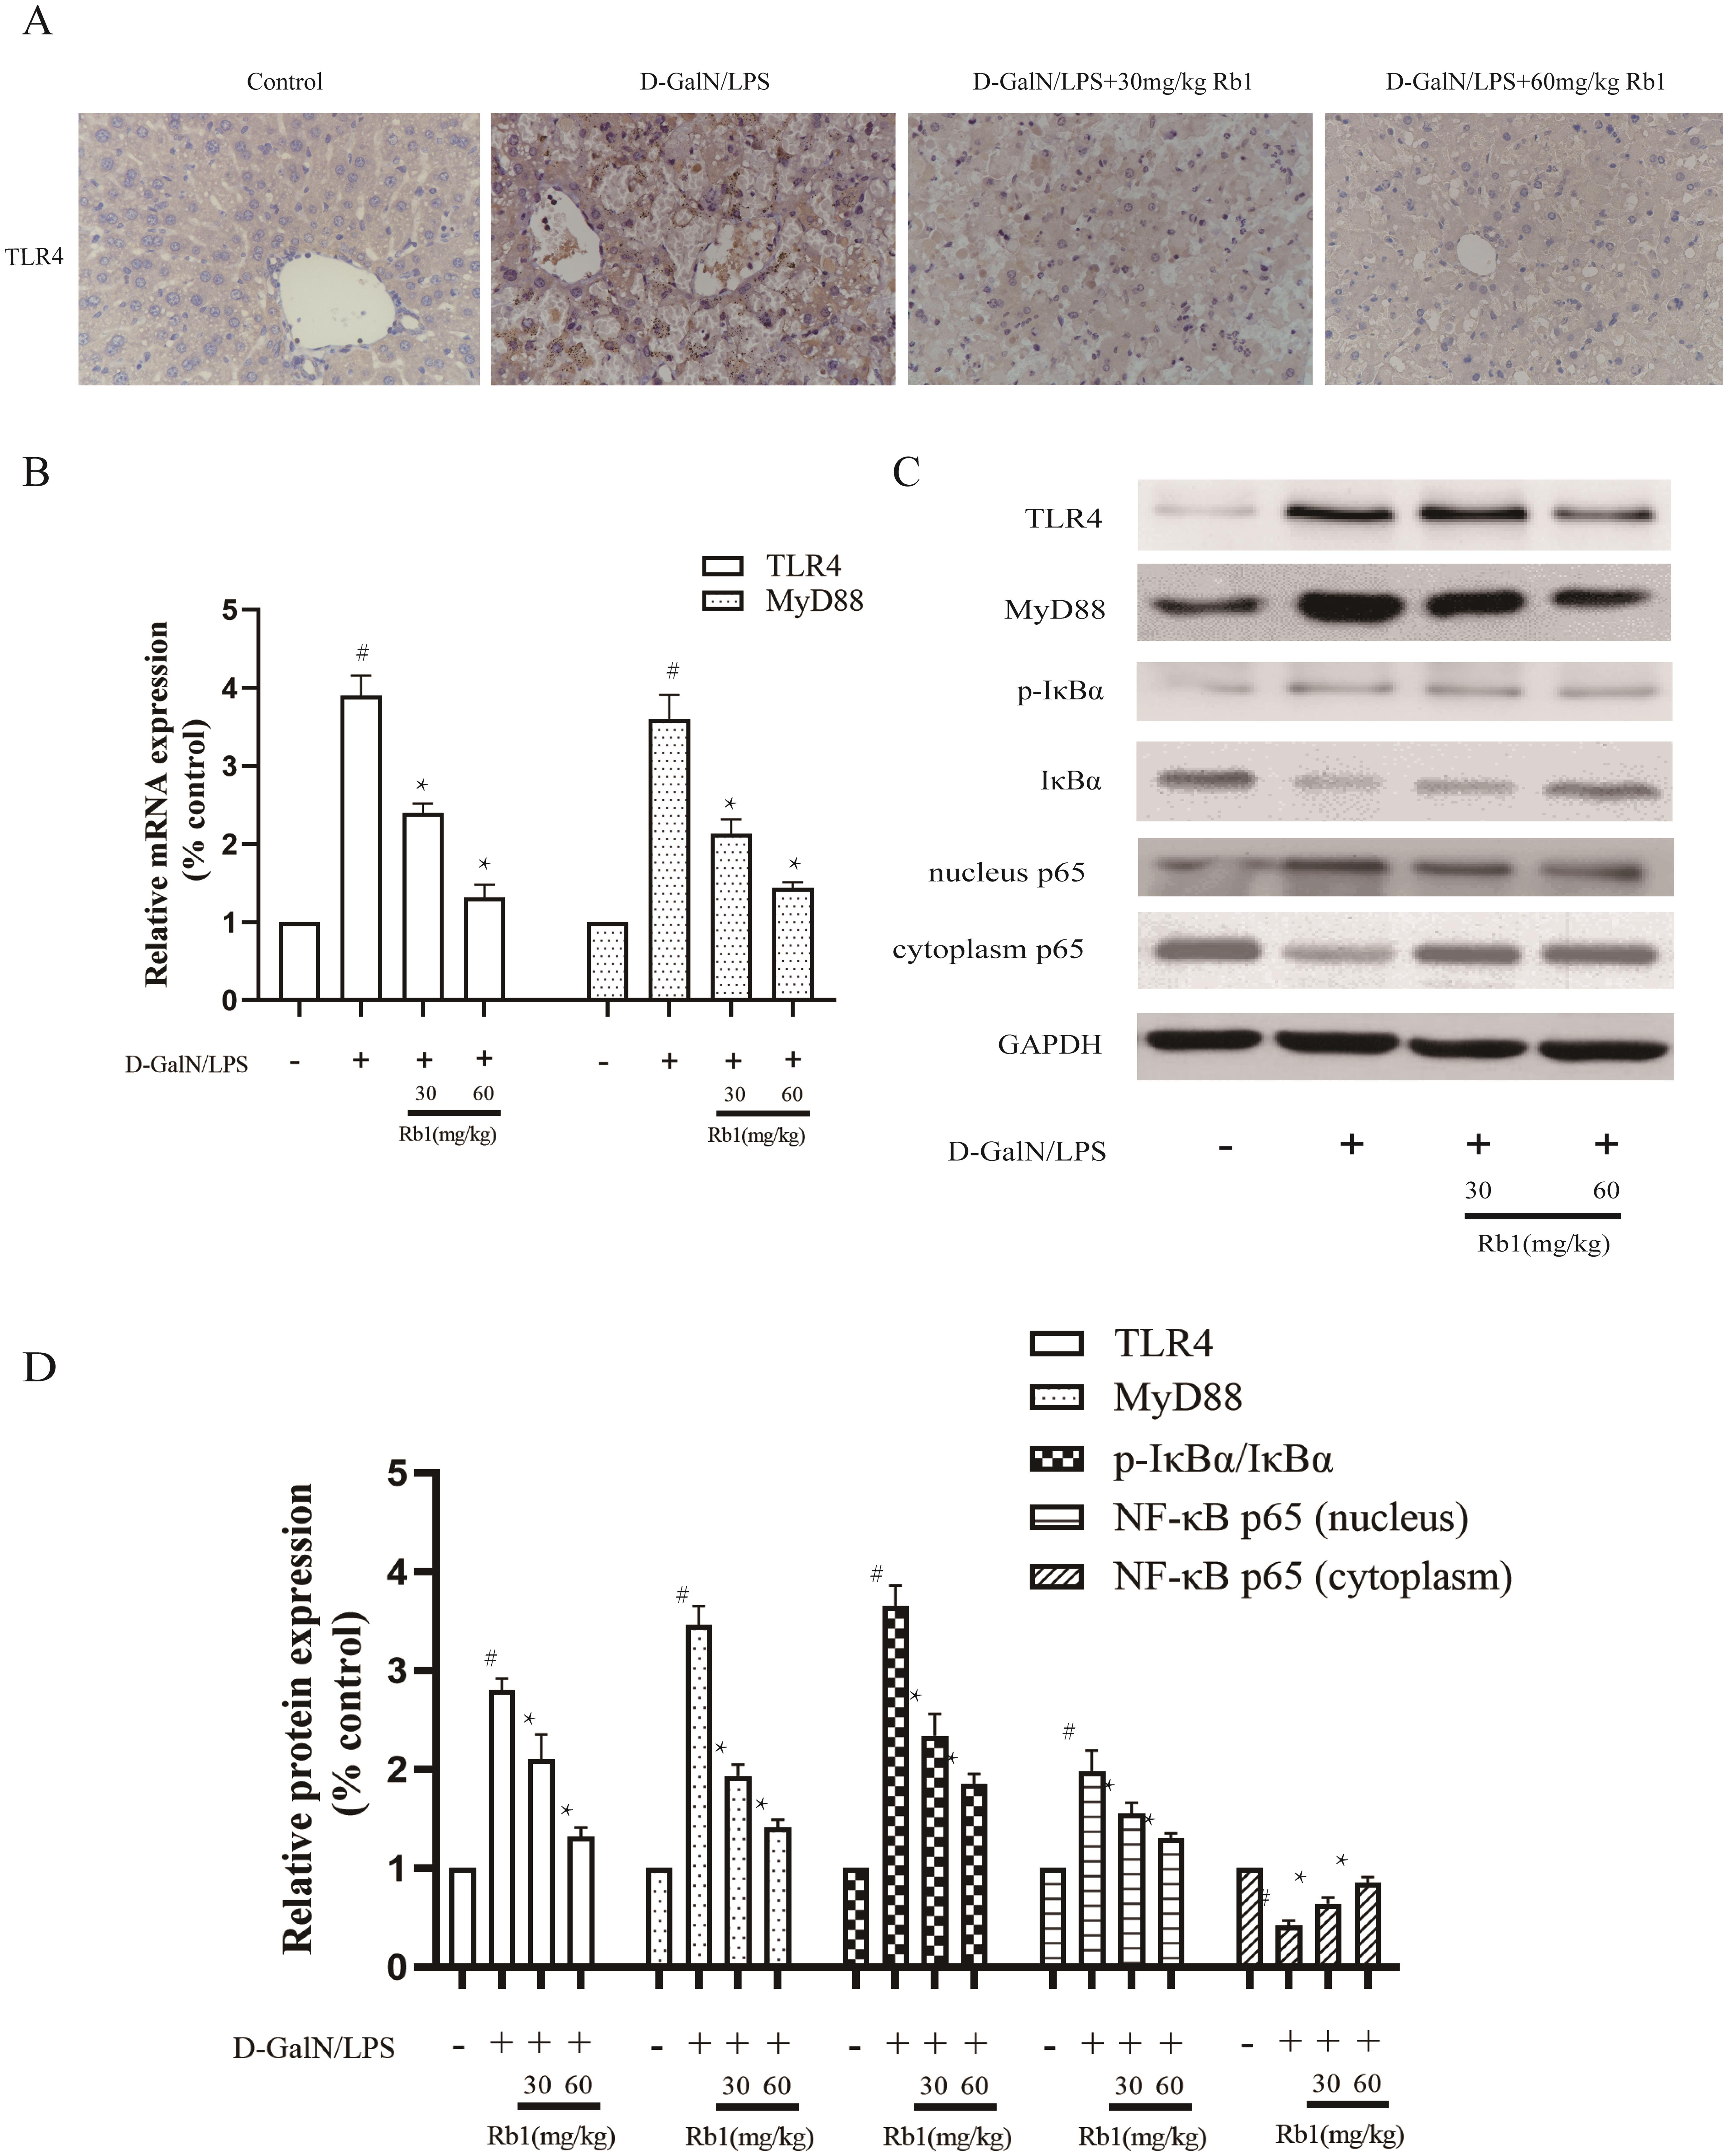 Effect of Rb1 on TLR4/NF-κB signal pathway in D-GalN/LPS-induced ALI mice.